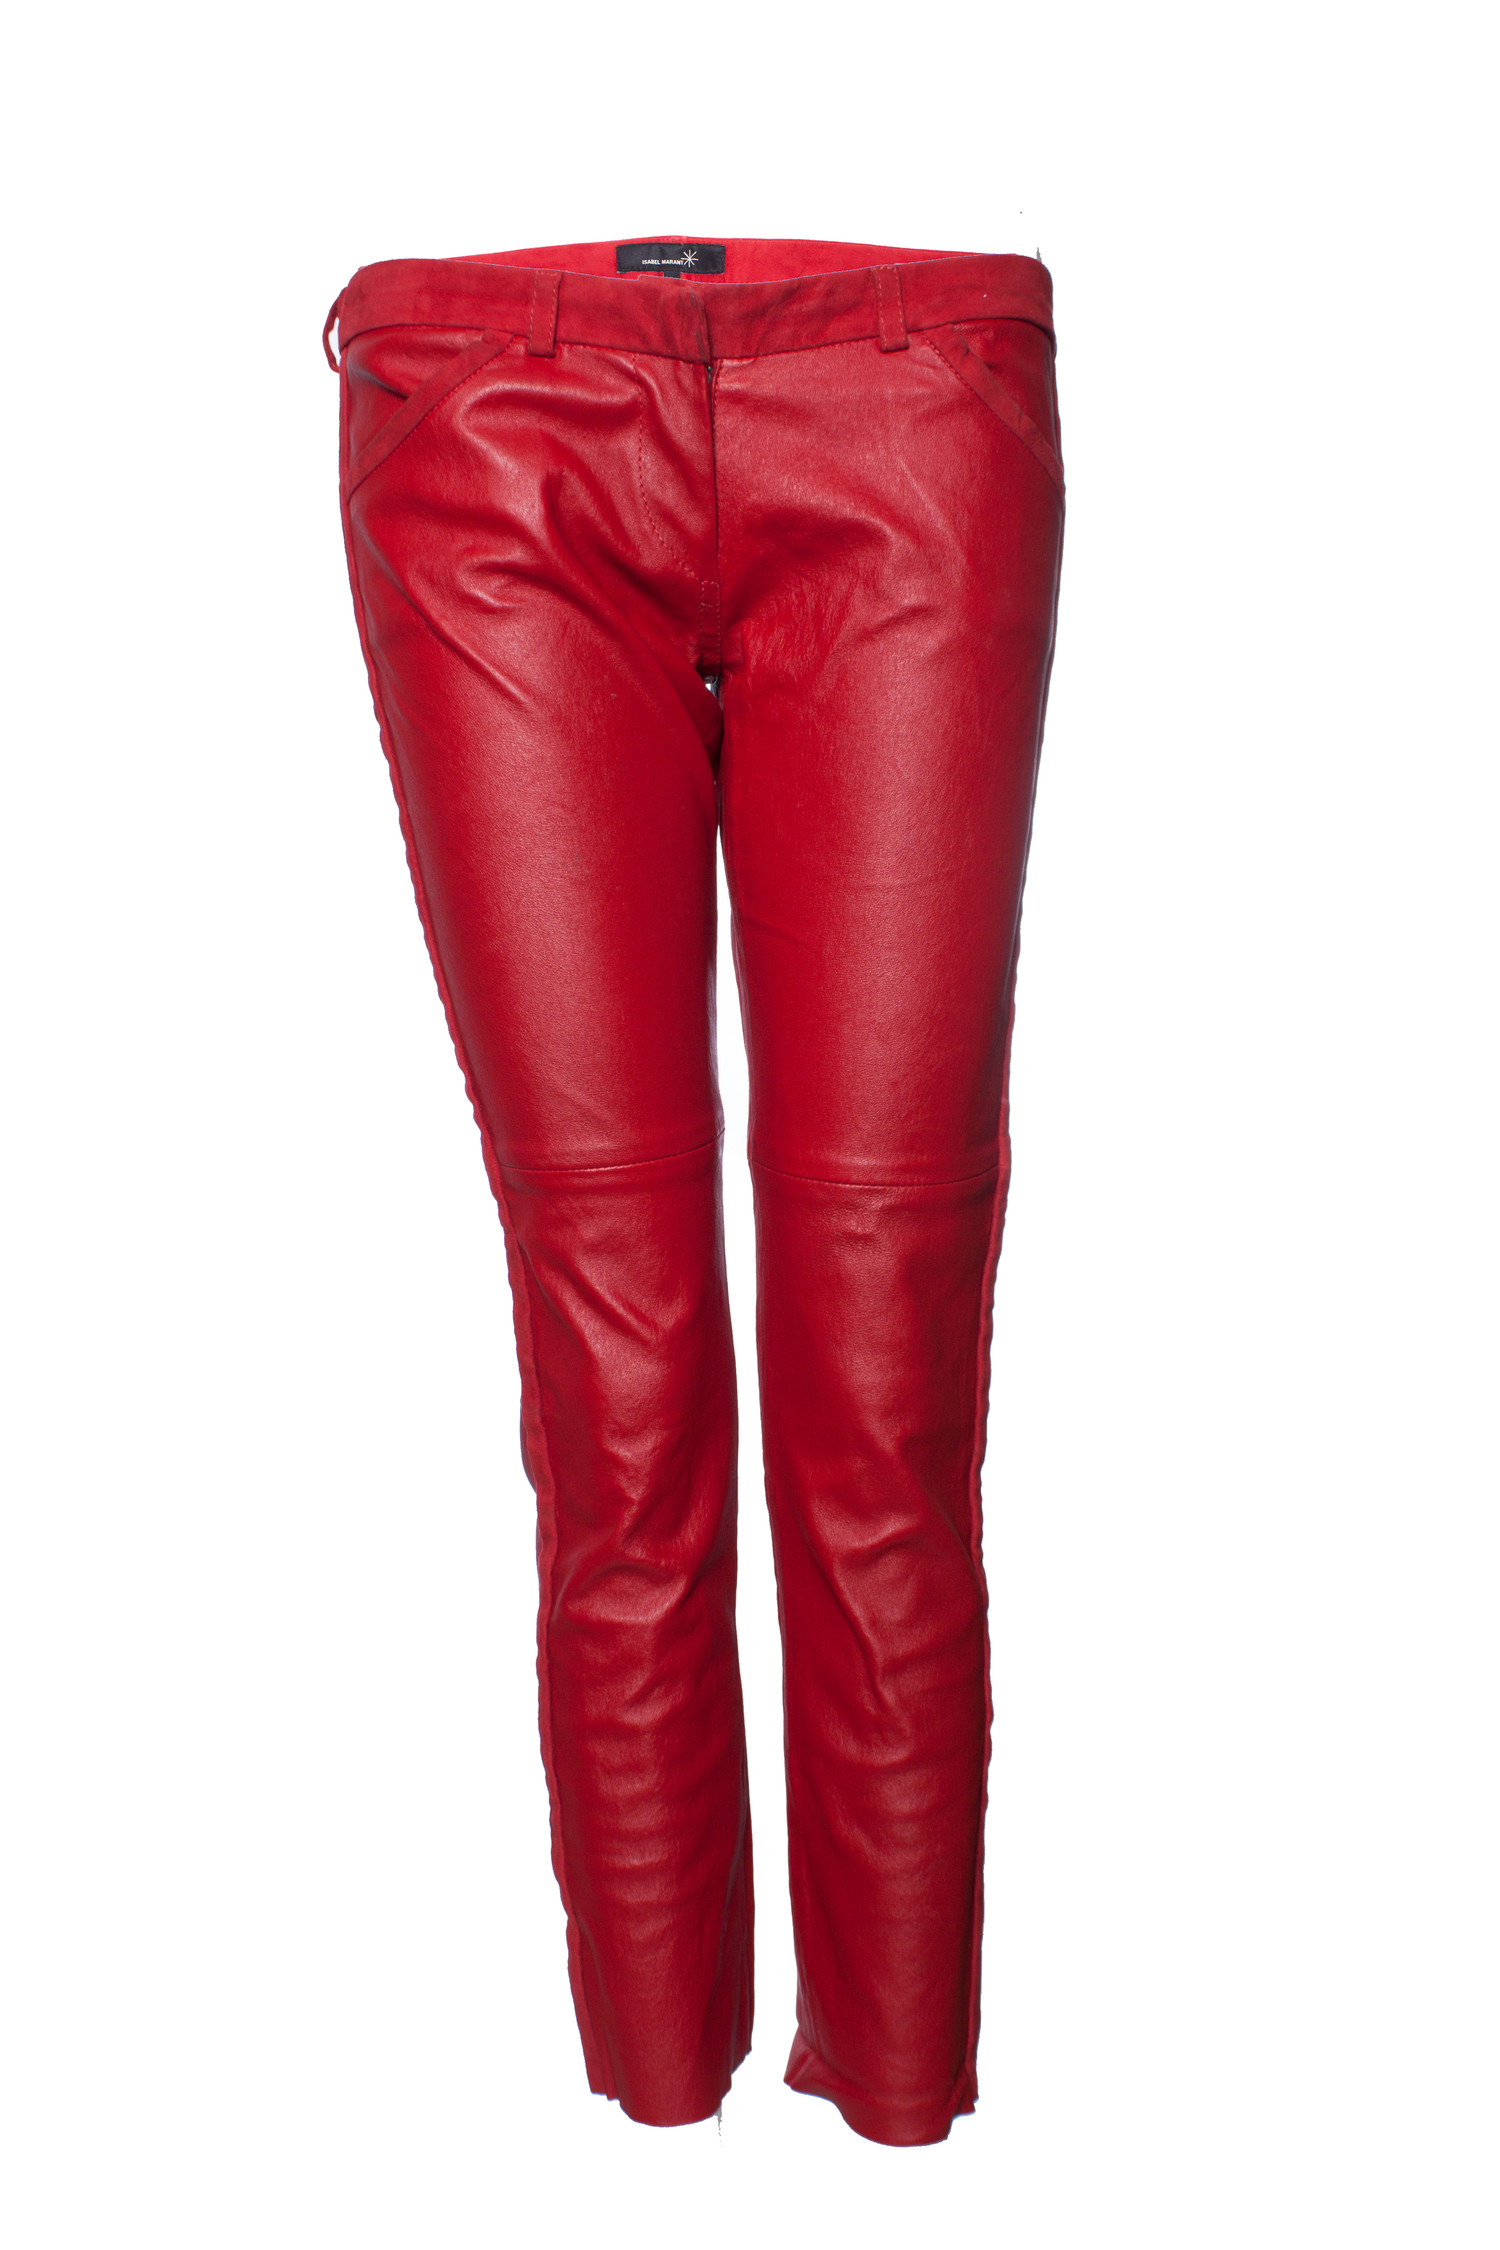 L212 Winter New Style Hot Sale Solid Color High Waist Stretch Trousers  Straight Leg Trousers MicroLa PU Leather Trousers  China Woman Pants and  Woman Trousers price  MadeinChinacom